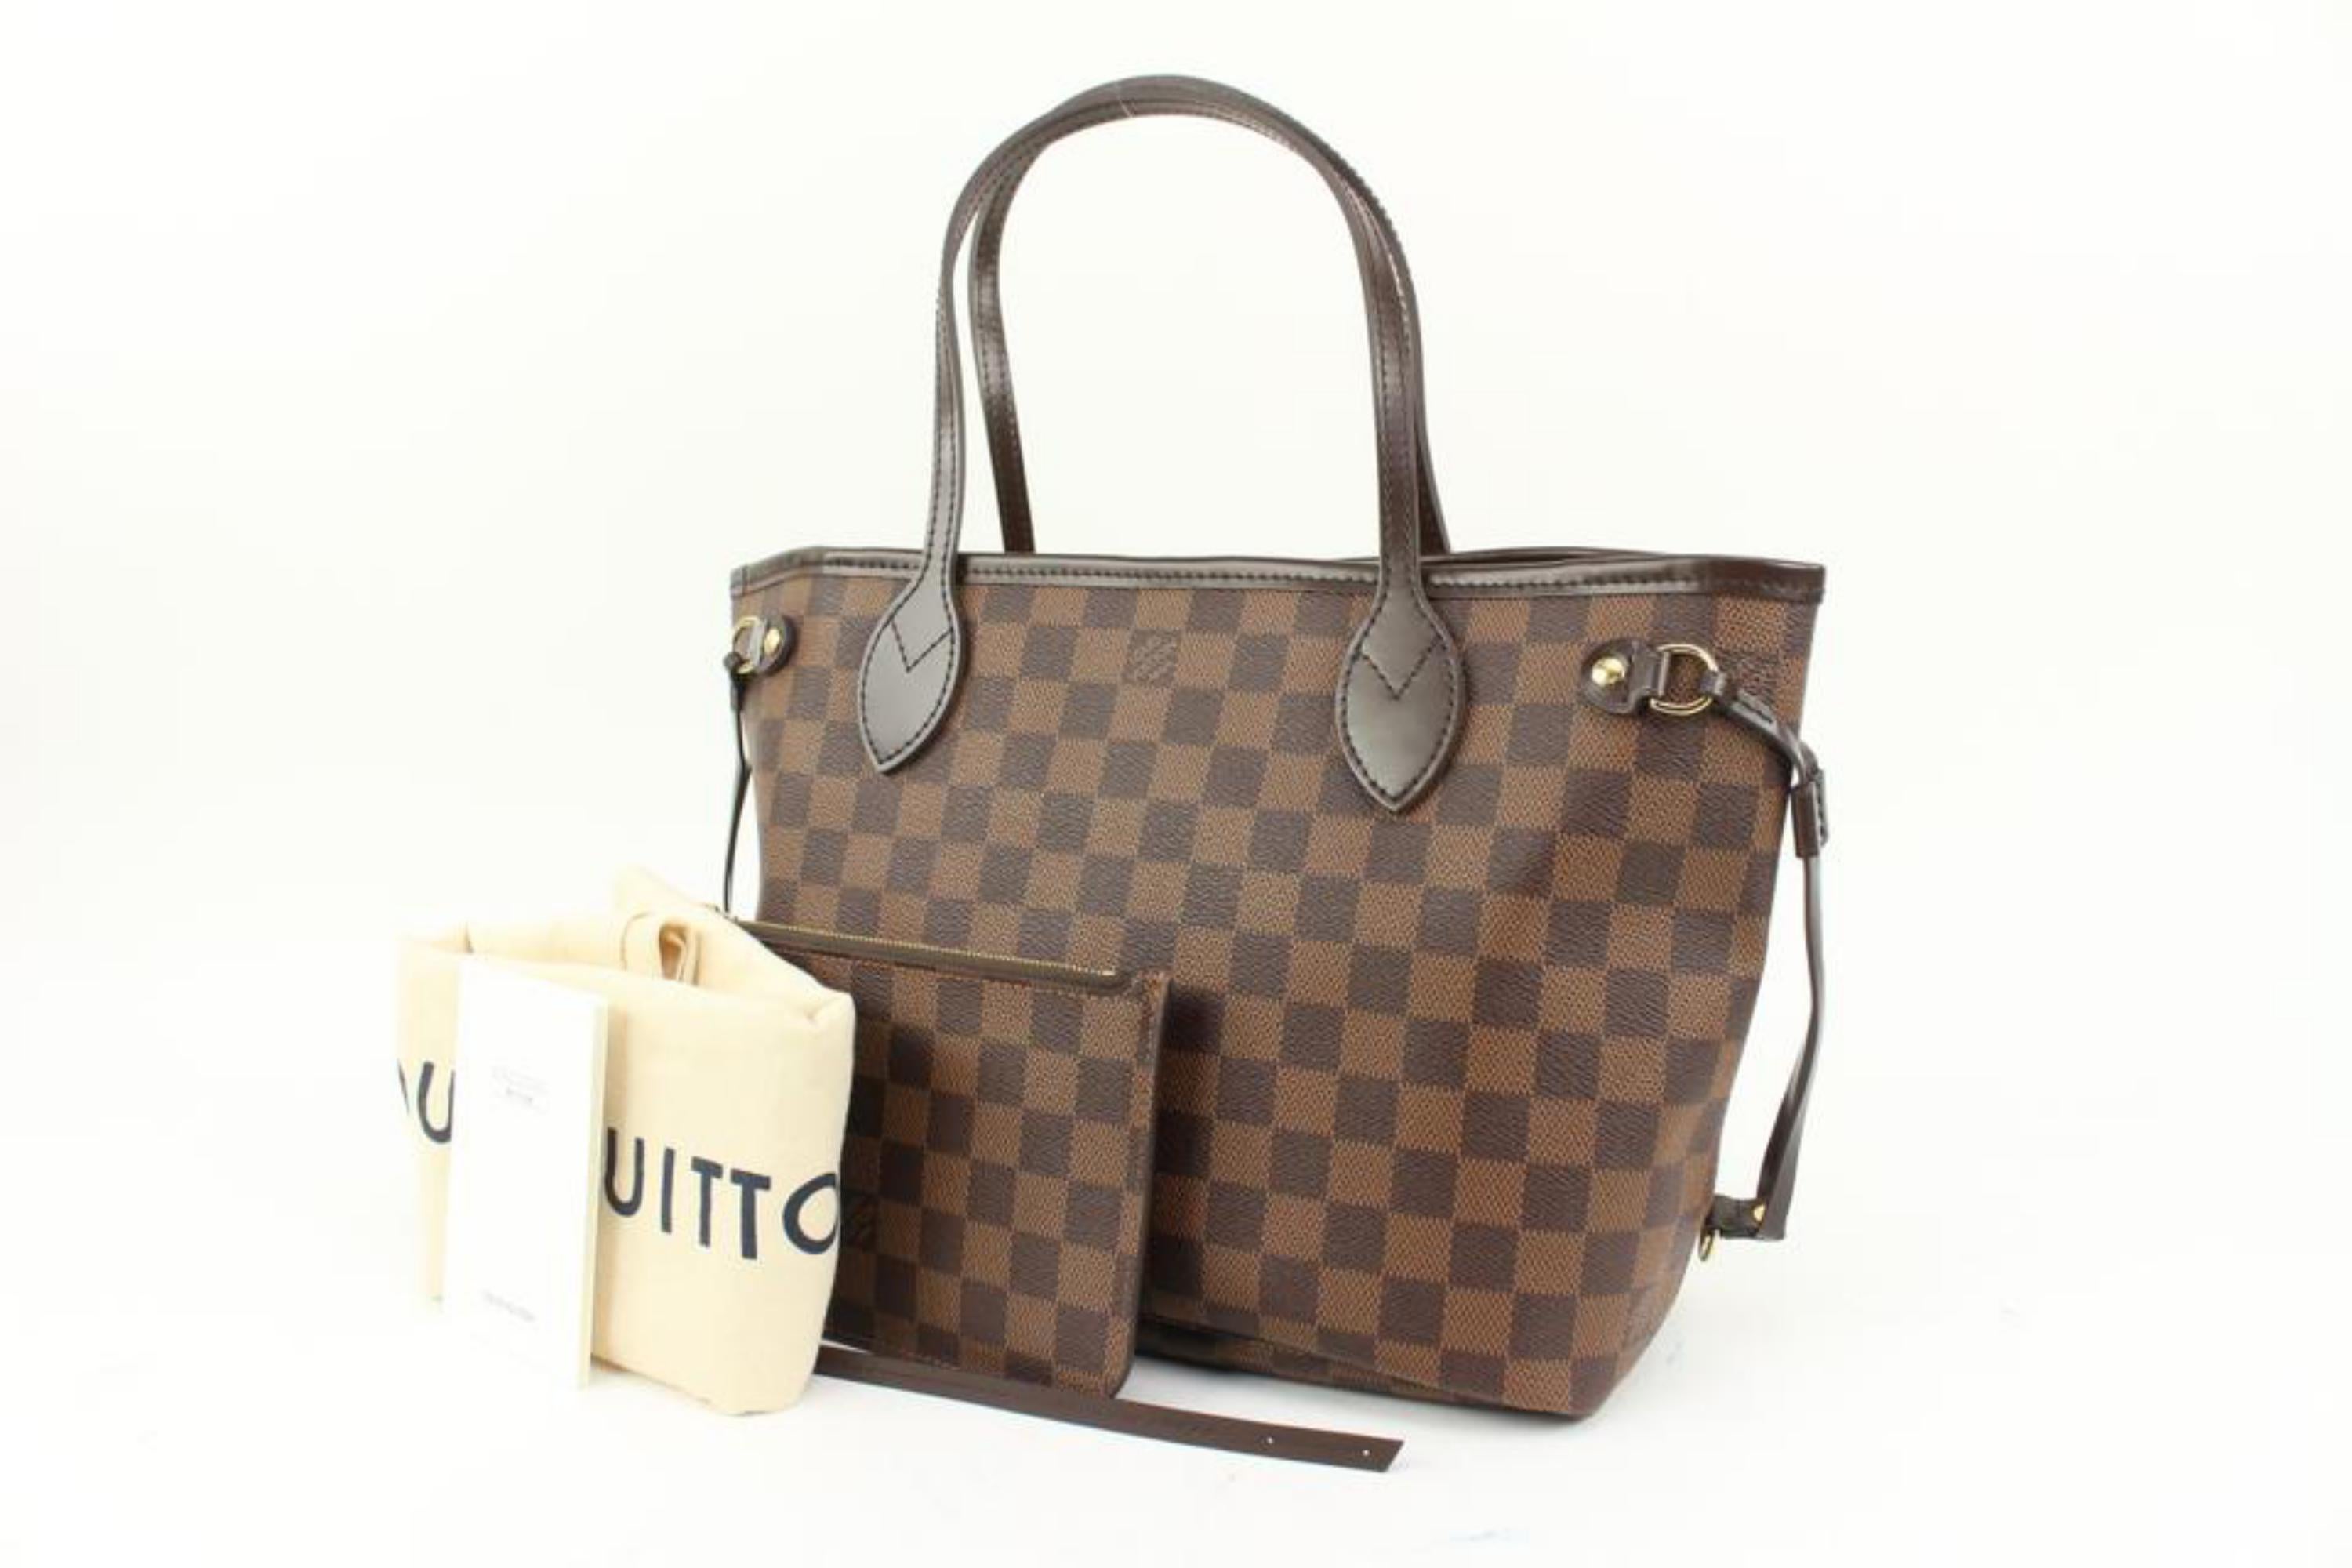 Louis Vuitton Small Damier Ebene Nevefull PM Tote with Pouch 80lv39s
Date Code/Serial Number: AR3186
Made In: France
Measurements: Length:  14.5